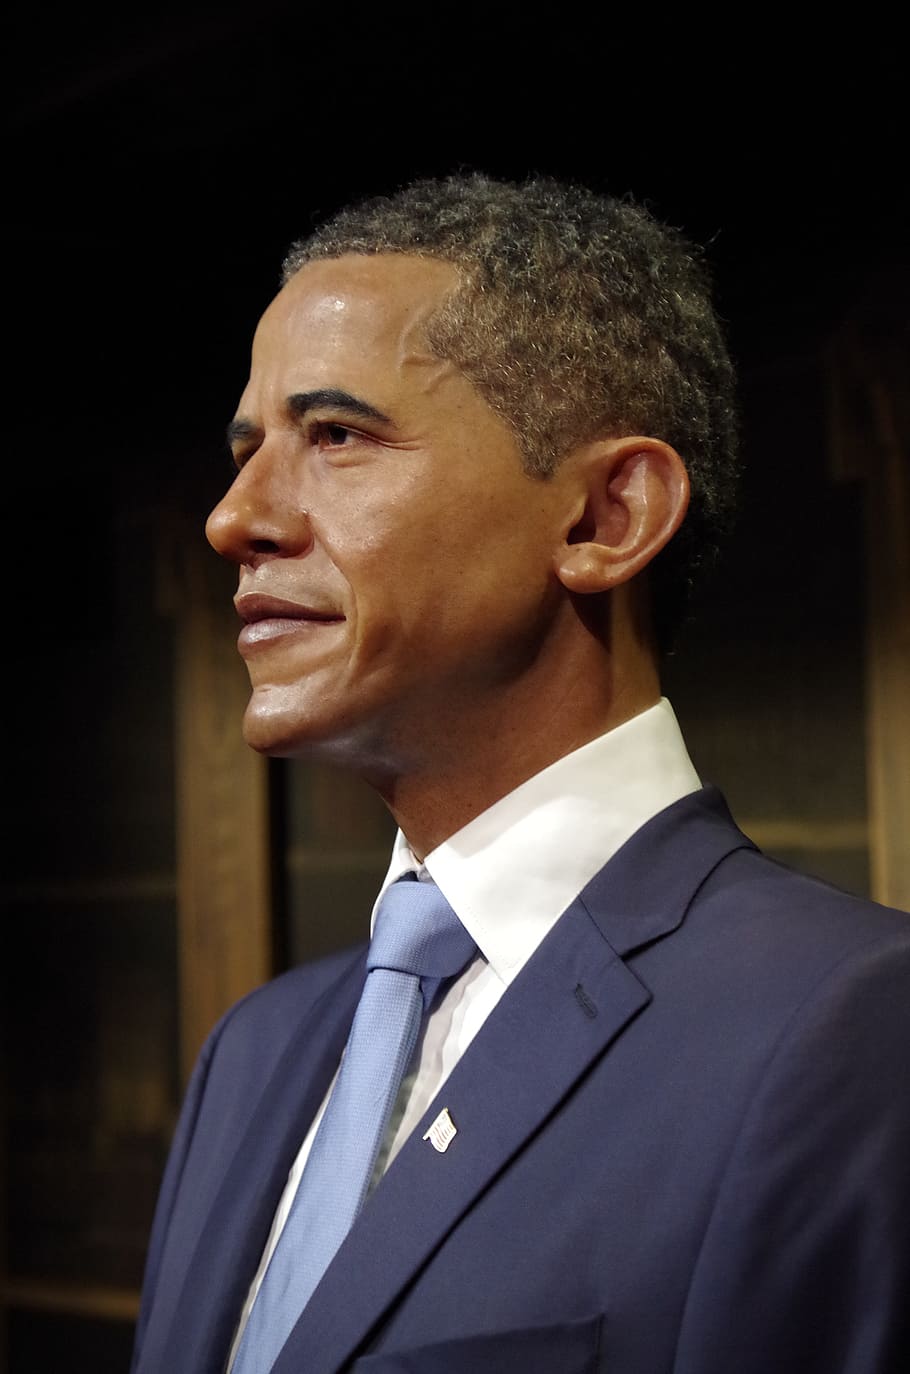 obama, the president of the, us, a wax dummy, headshot, one person, HD wallpaper